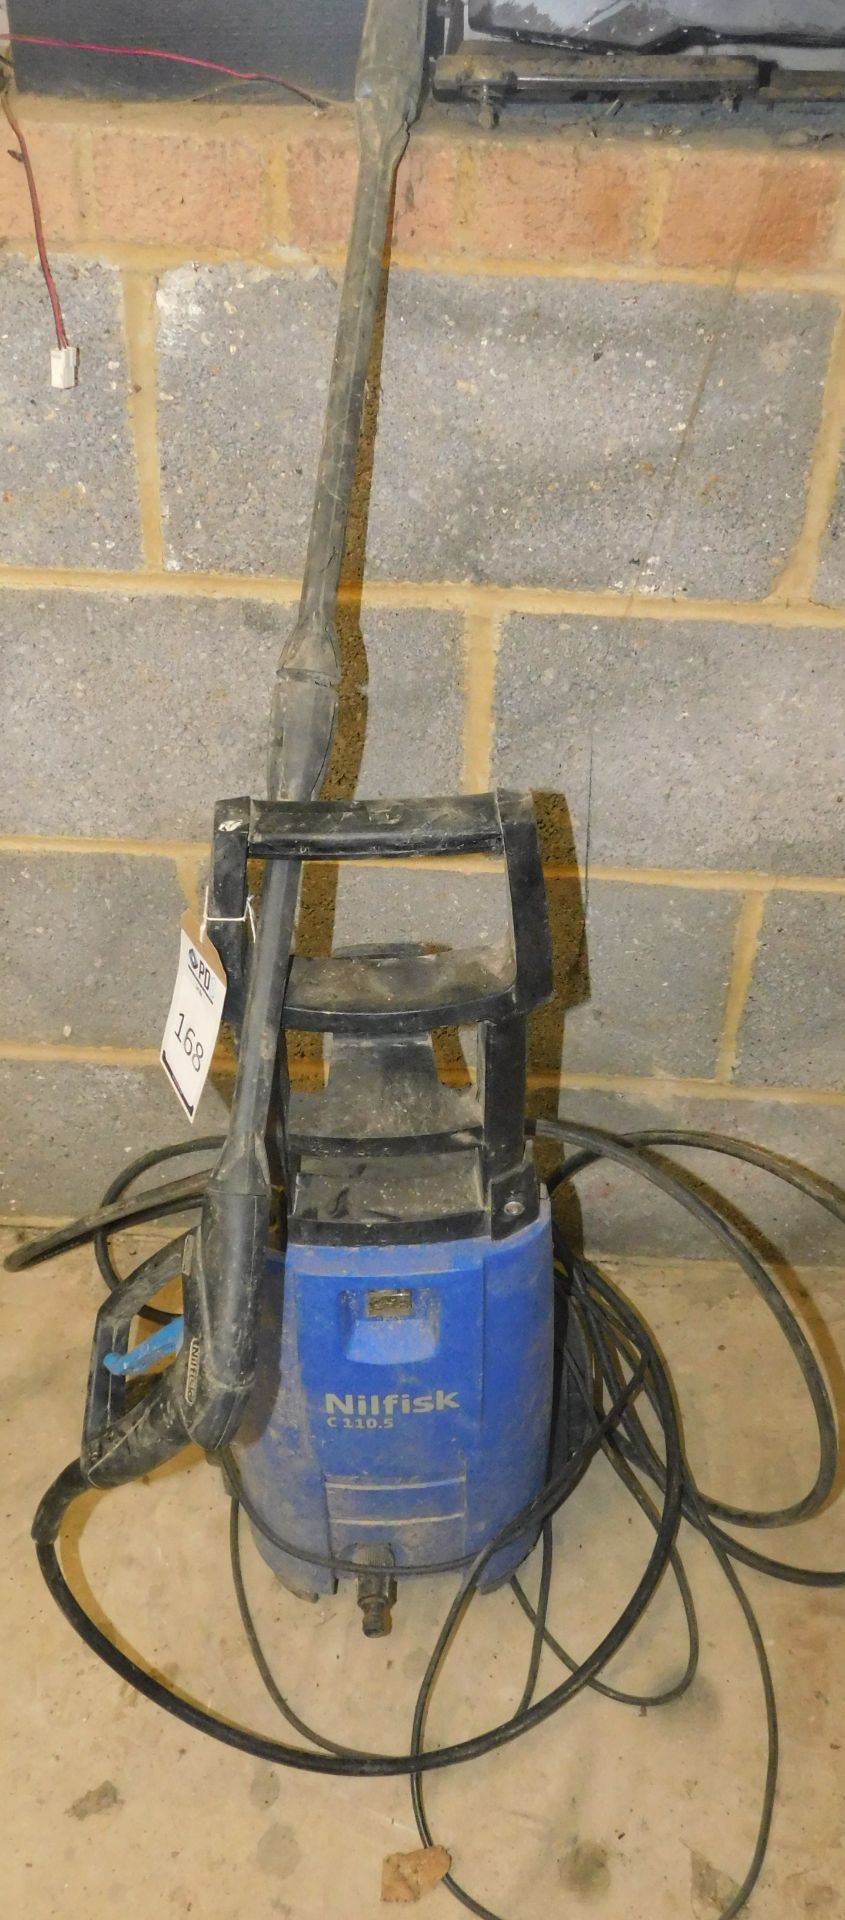 Nilfisk C110.5 Power Washer (Location Ashford, Kent. Please Refer to General Notes)